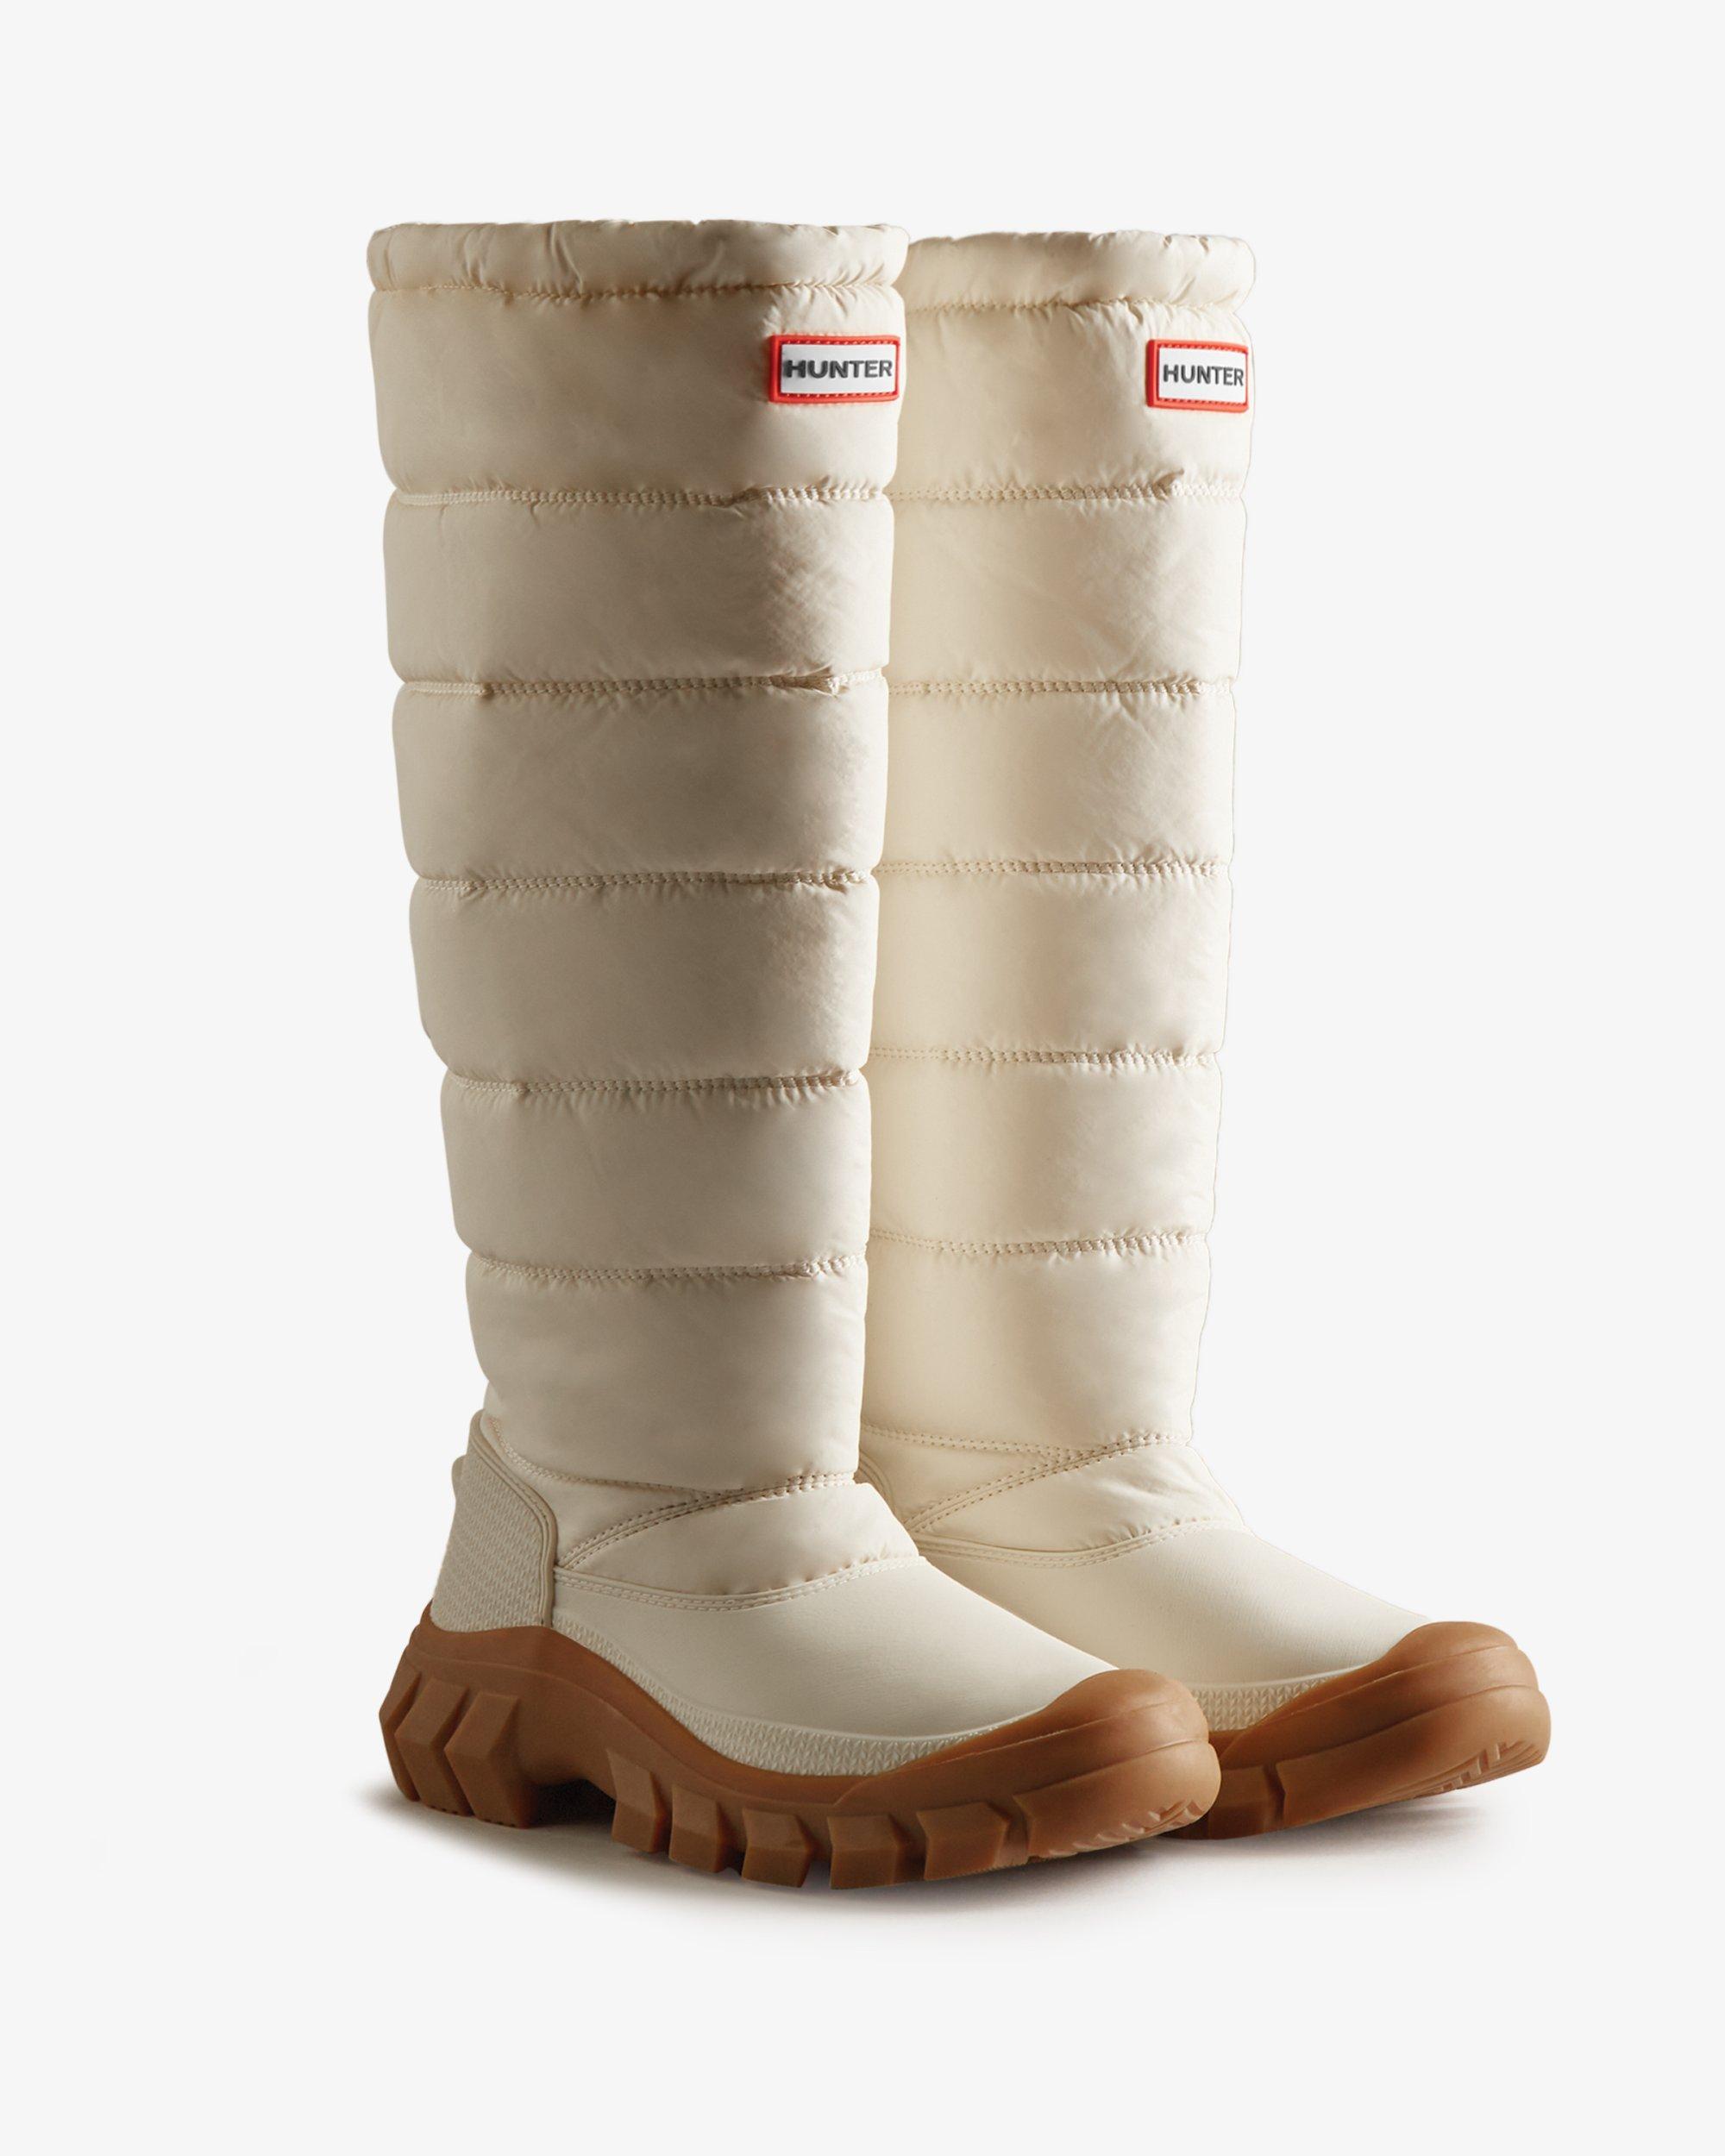 HUNTER Intrepid Insulated Tall Snow Boots in Natural | Lyst